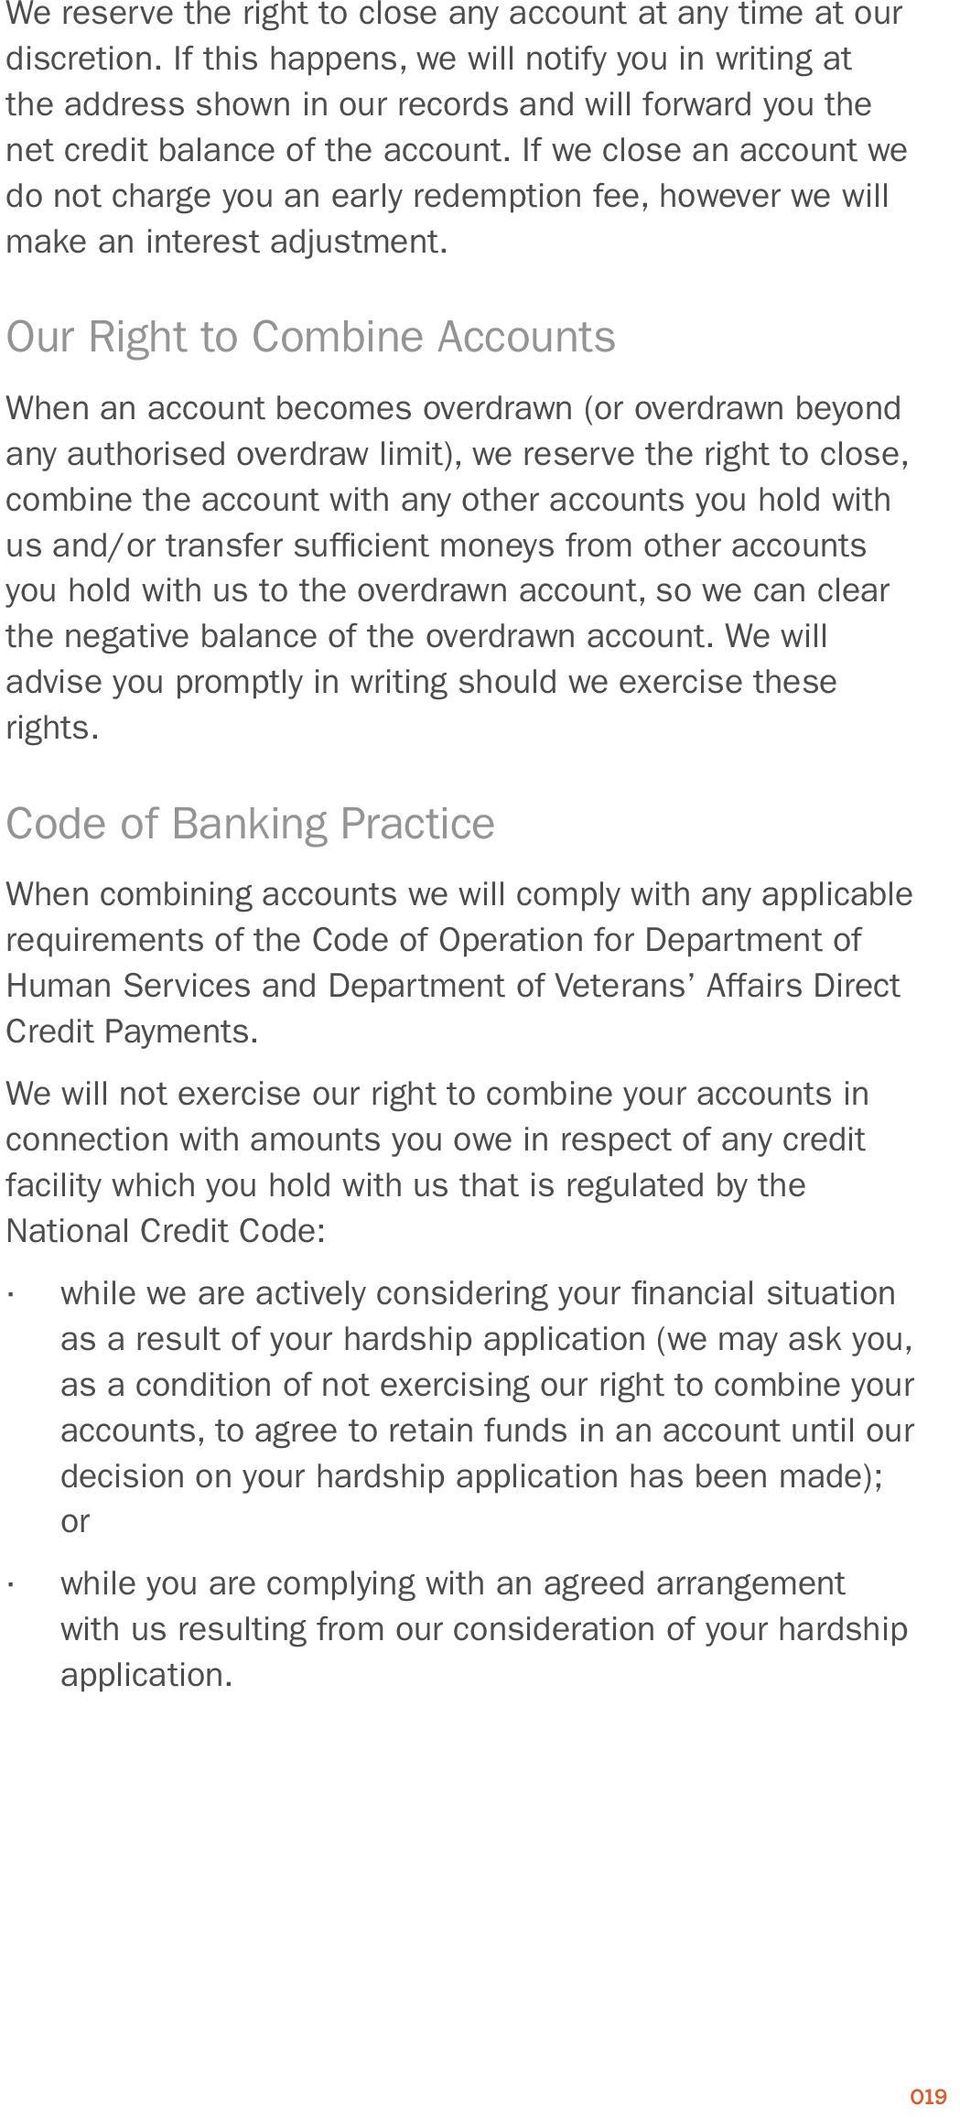 If we close an account we do not charge you an early redemption fee, however we will make an interest adjustment.